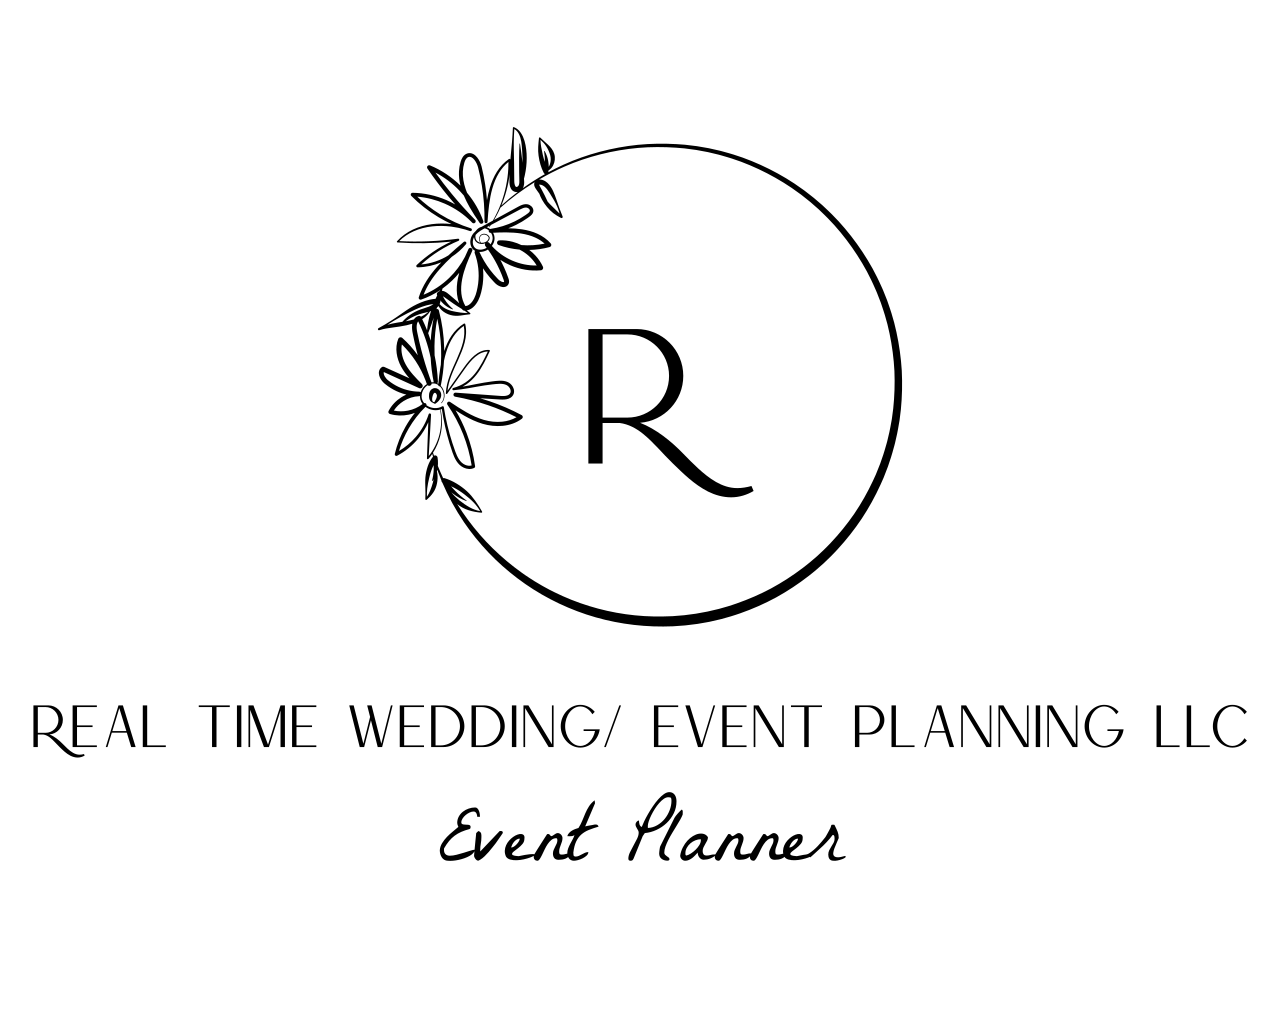 Real Time Wedding / Event Planning LLC